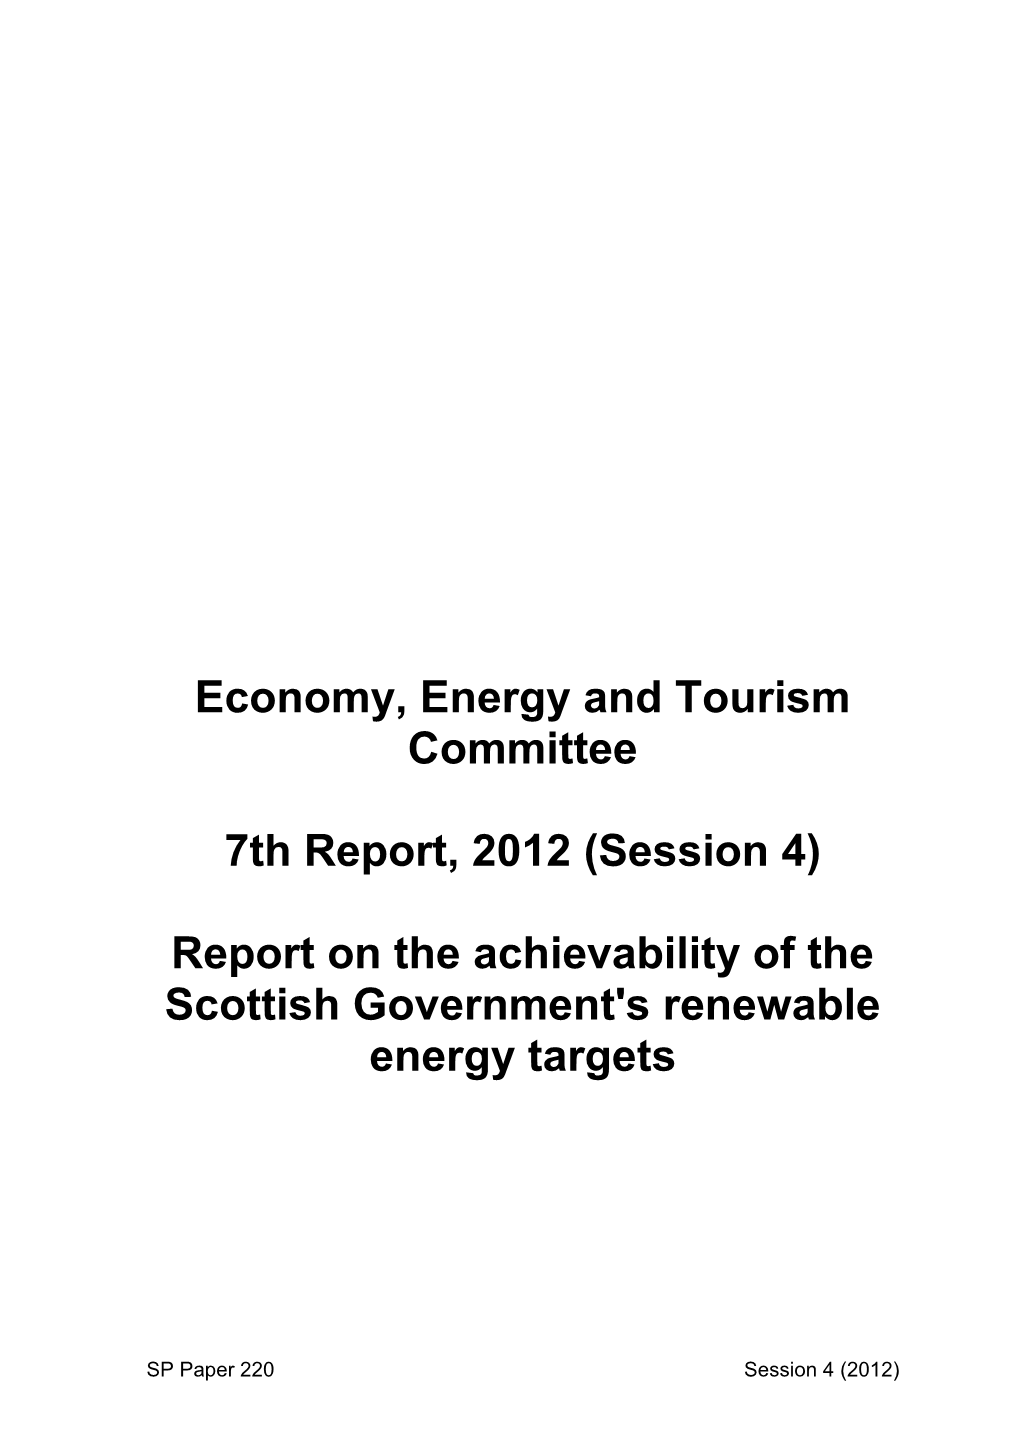 Economy, Energy and Tourism Committee 7Th